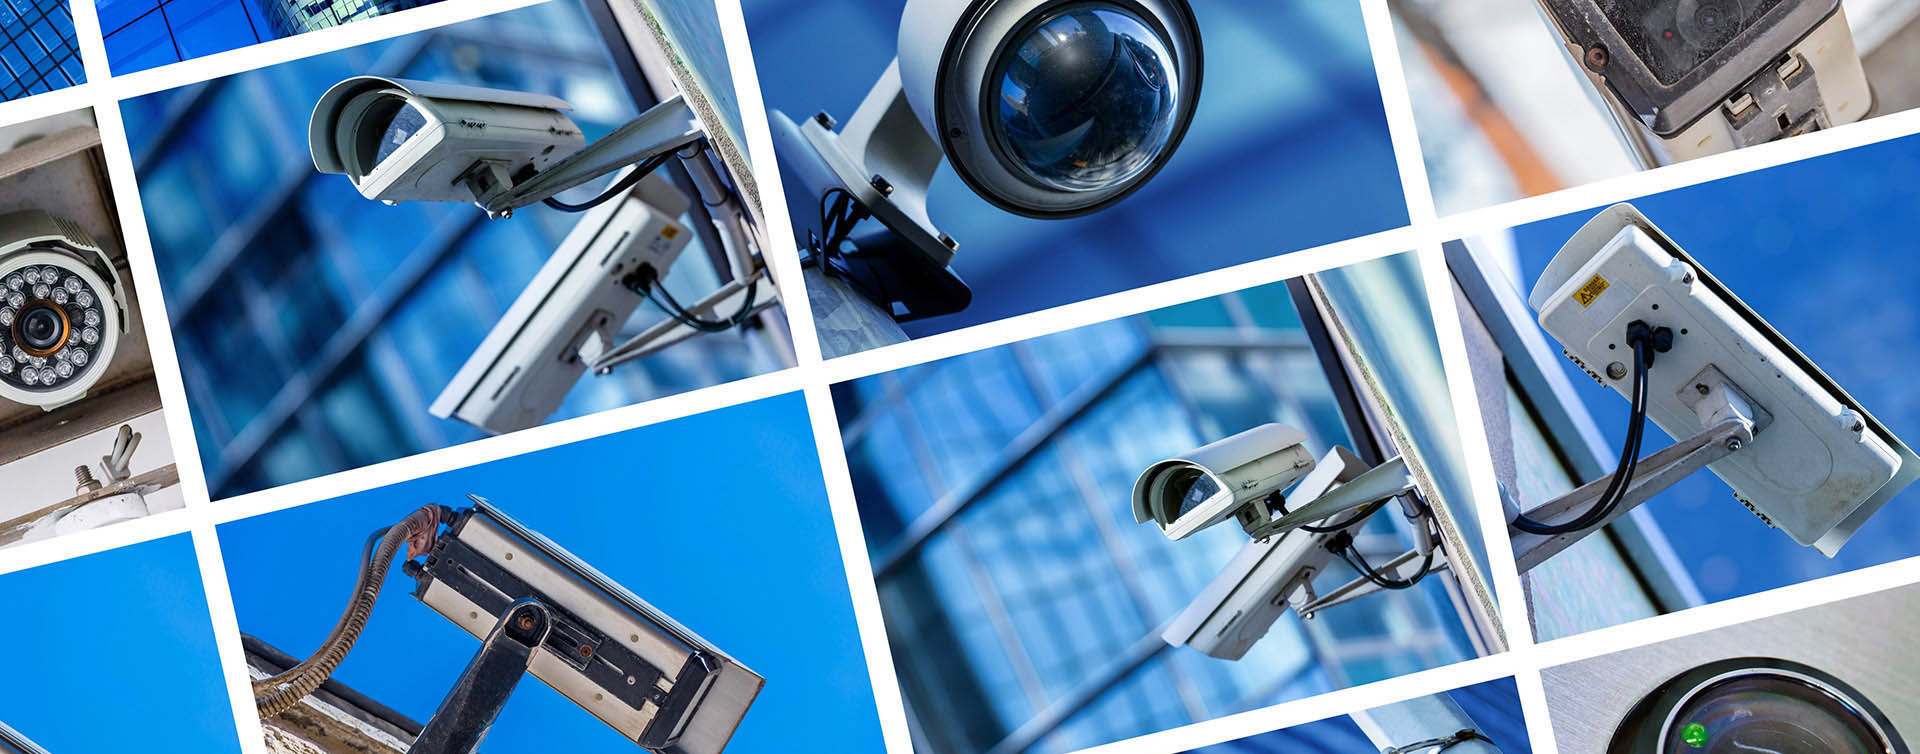 Revolutionizing Surveillance: The Dynamic Landscape of the Commercial AI Security Camera Market